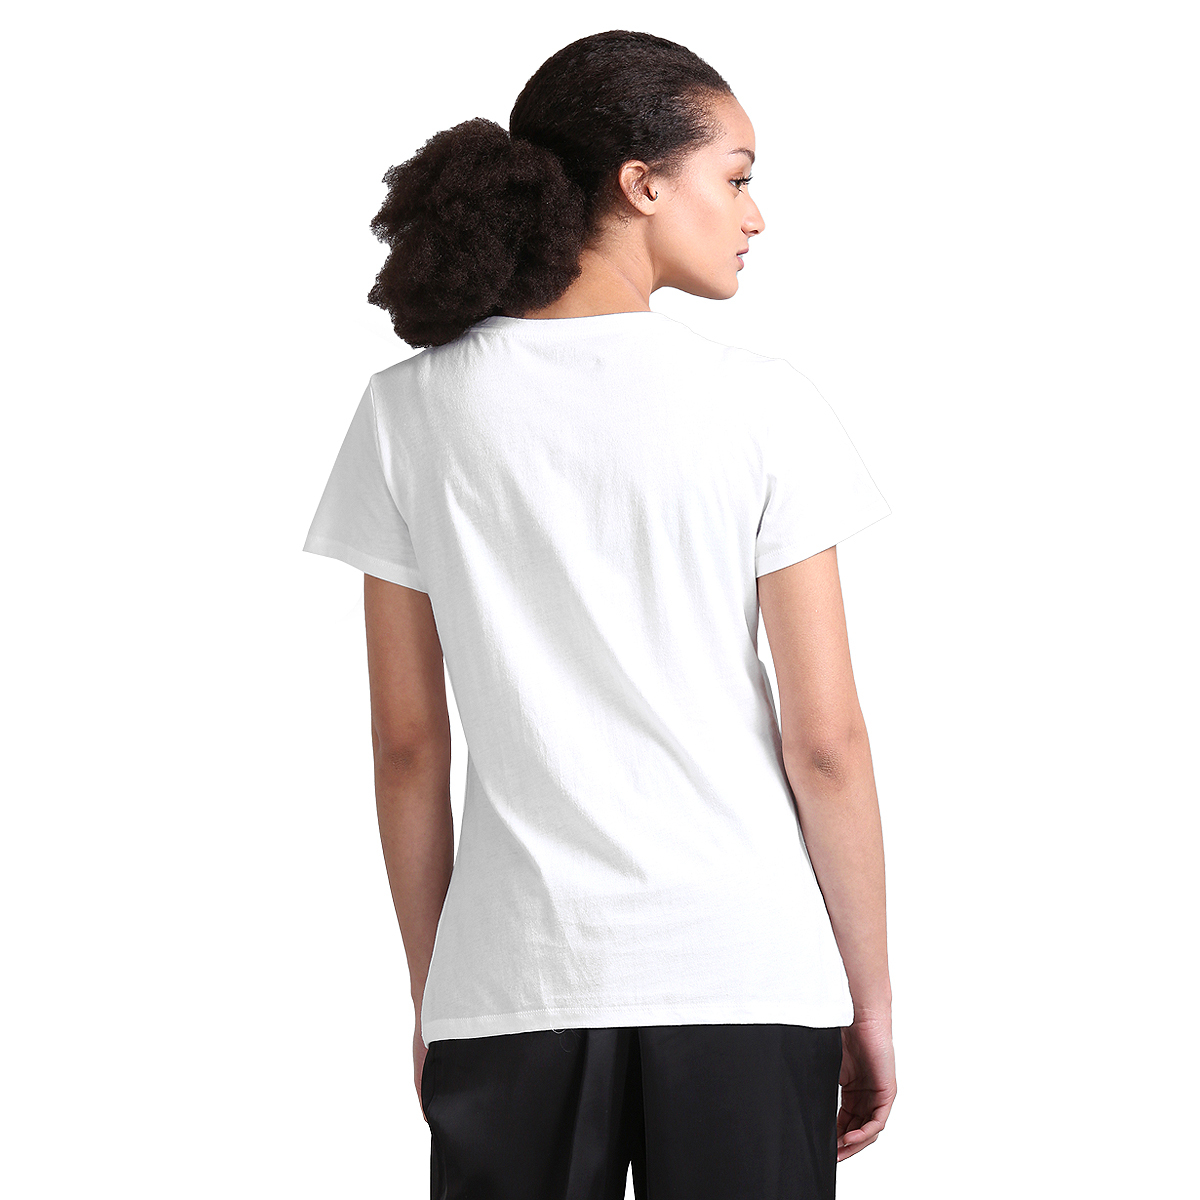 Gap Solid Color Regular Fit Round Neck T-Shirt Styled with Logo Graphic At Chest - White